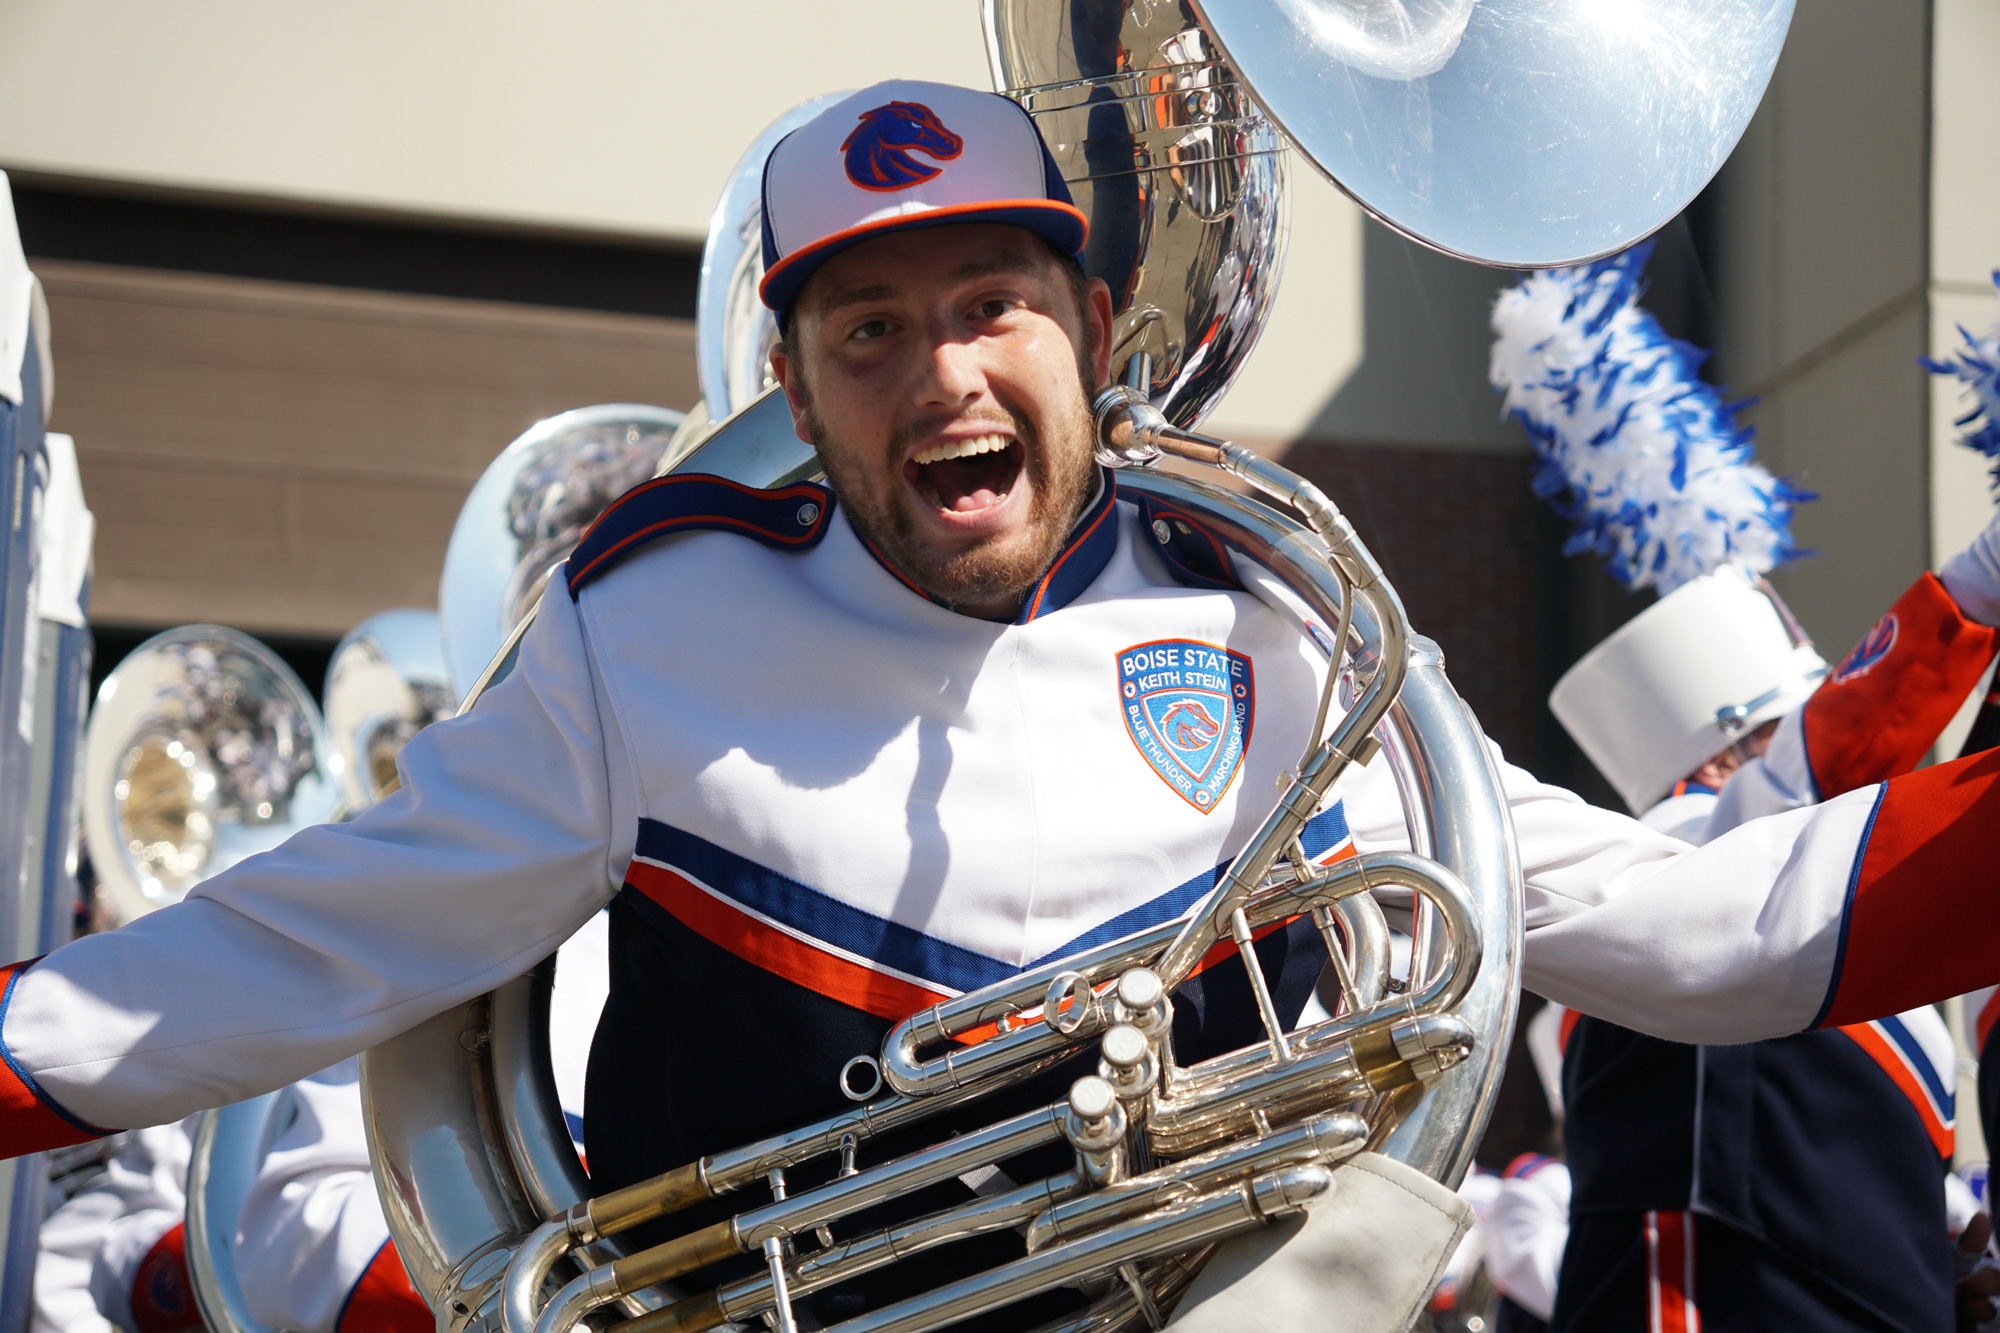 Martin Cuntz with instrument in his Blue Thunder uniform